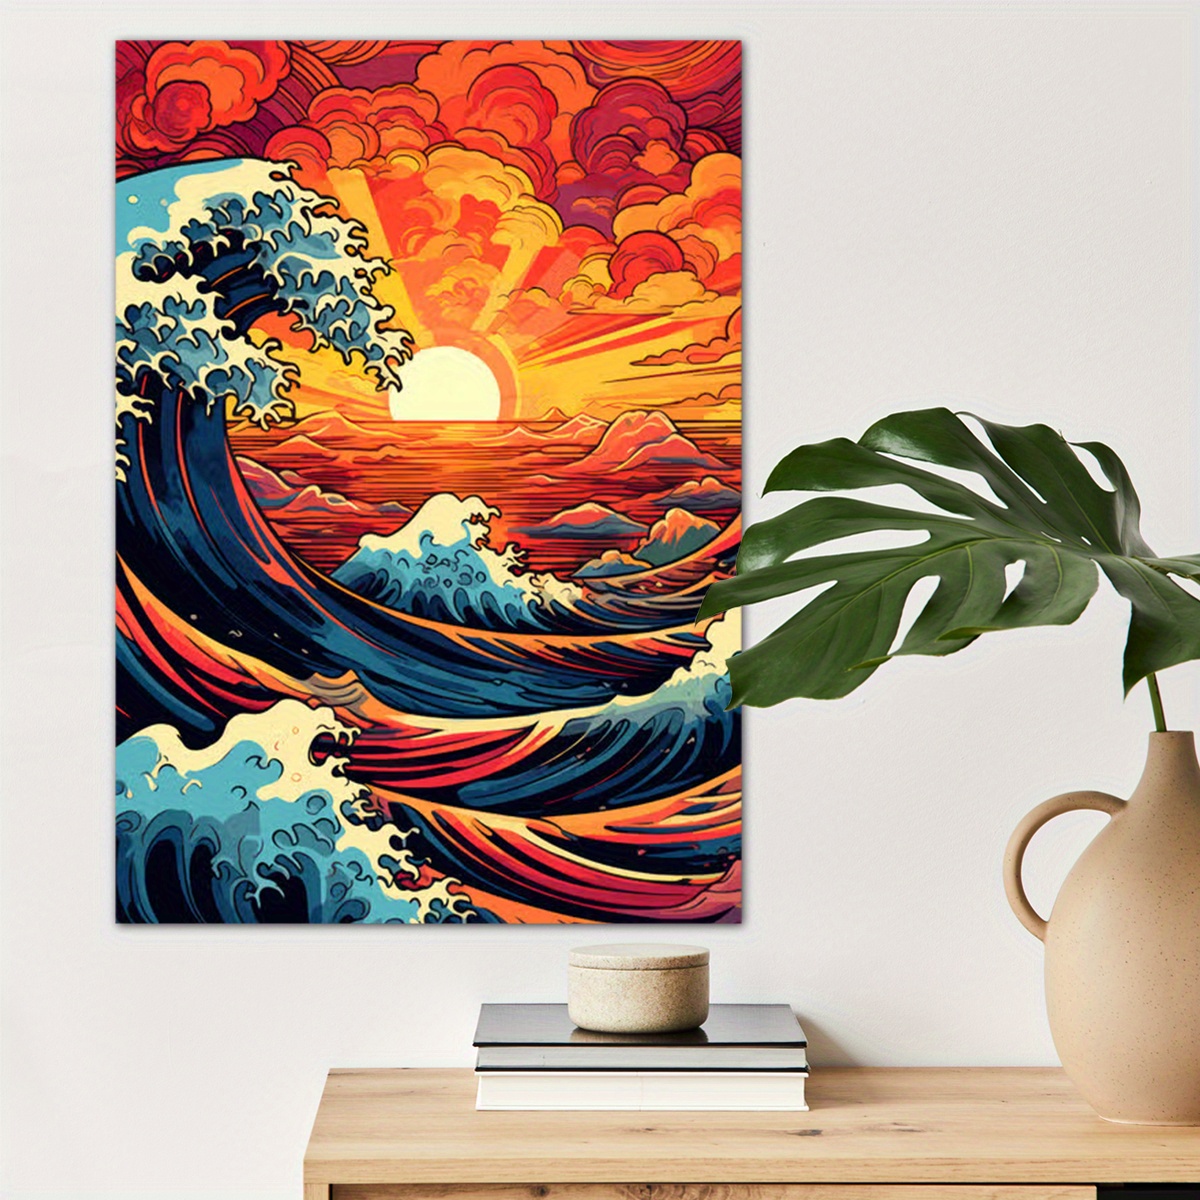 

1pc Great Ocean Wave Poster Canvas Wall Art For Home Decor, Sea Sunset Poster Wall Decor High Quality Canvas Prints For Living Room Bedroom Kitchen Office Cafe Decor, Perfect Gift And Decoration